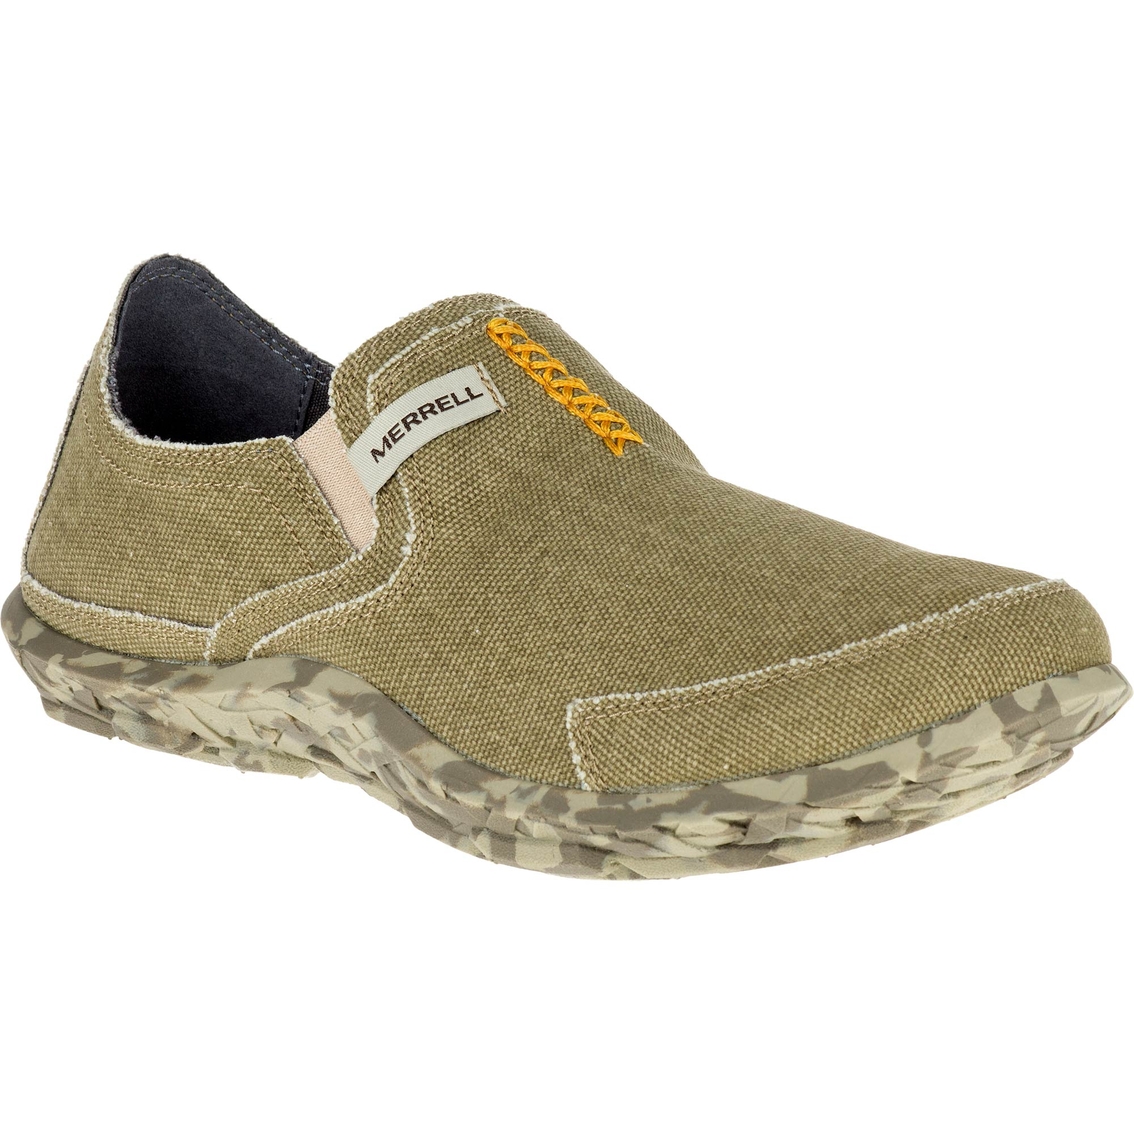 merrell casual slip on shoes